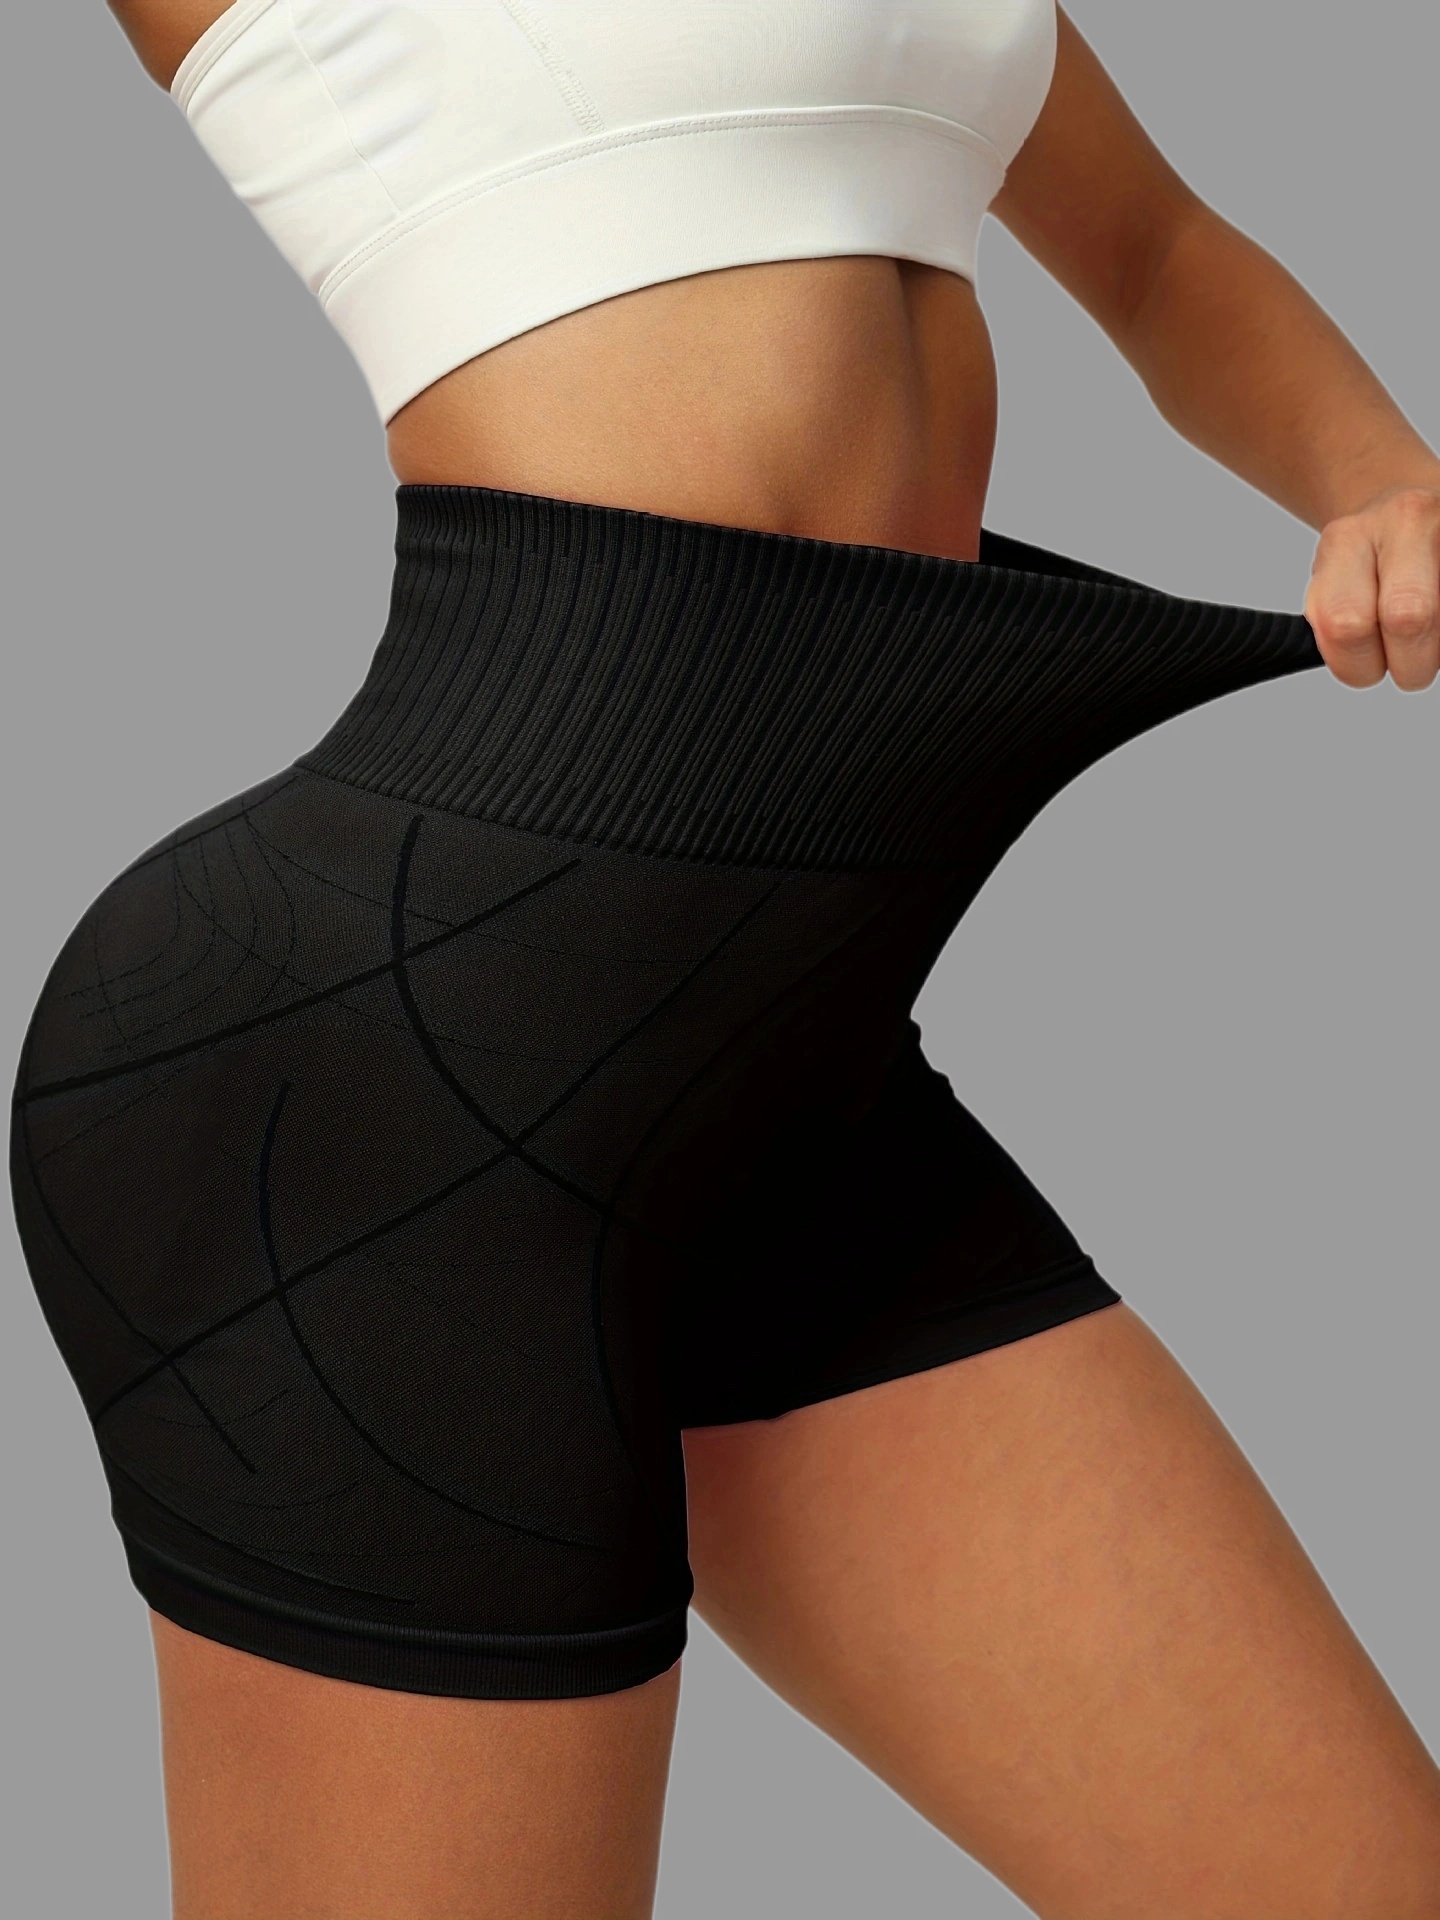 THE GYM PEOPLE High Waist Yoga Shorts for Women Tummy Control Fitness  Athletic Workout Running Shorts with Deep Pockets (X-Small, Black) at   Women's Clothing store